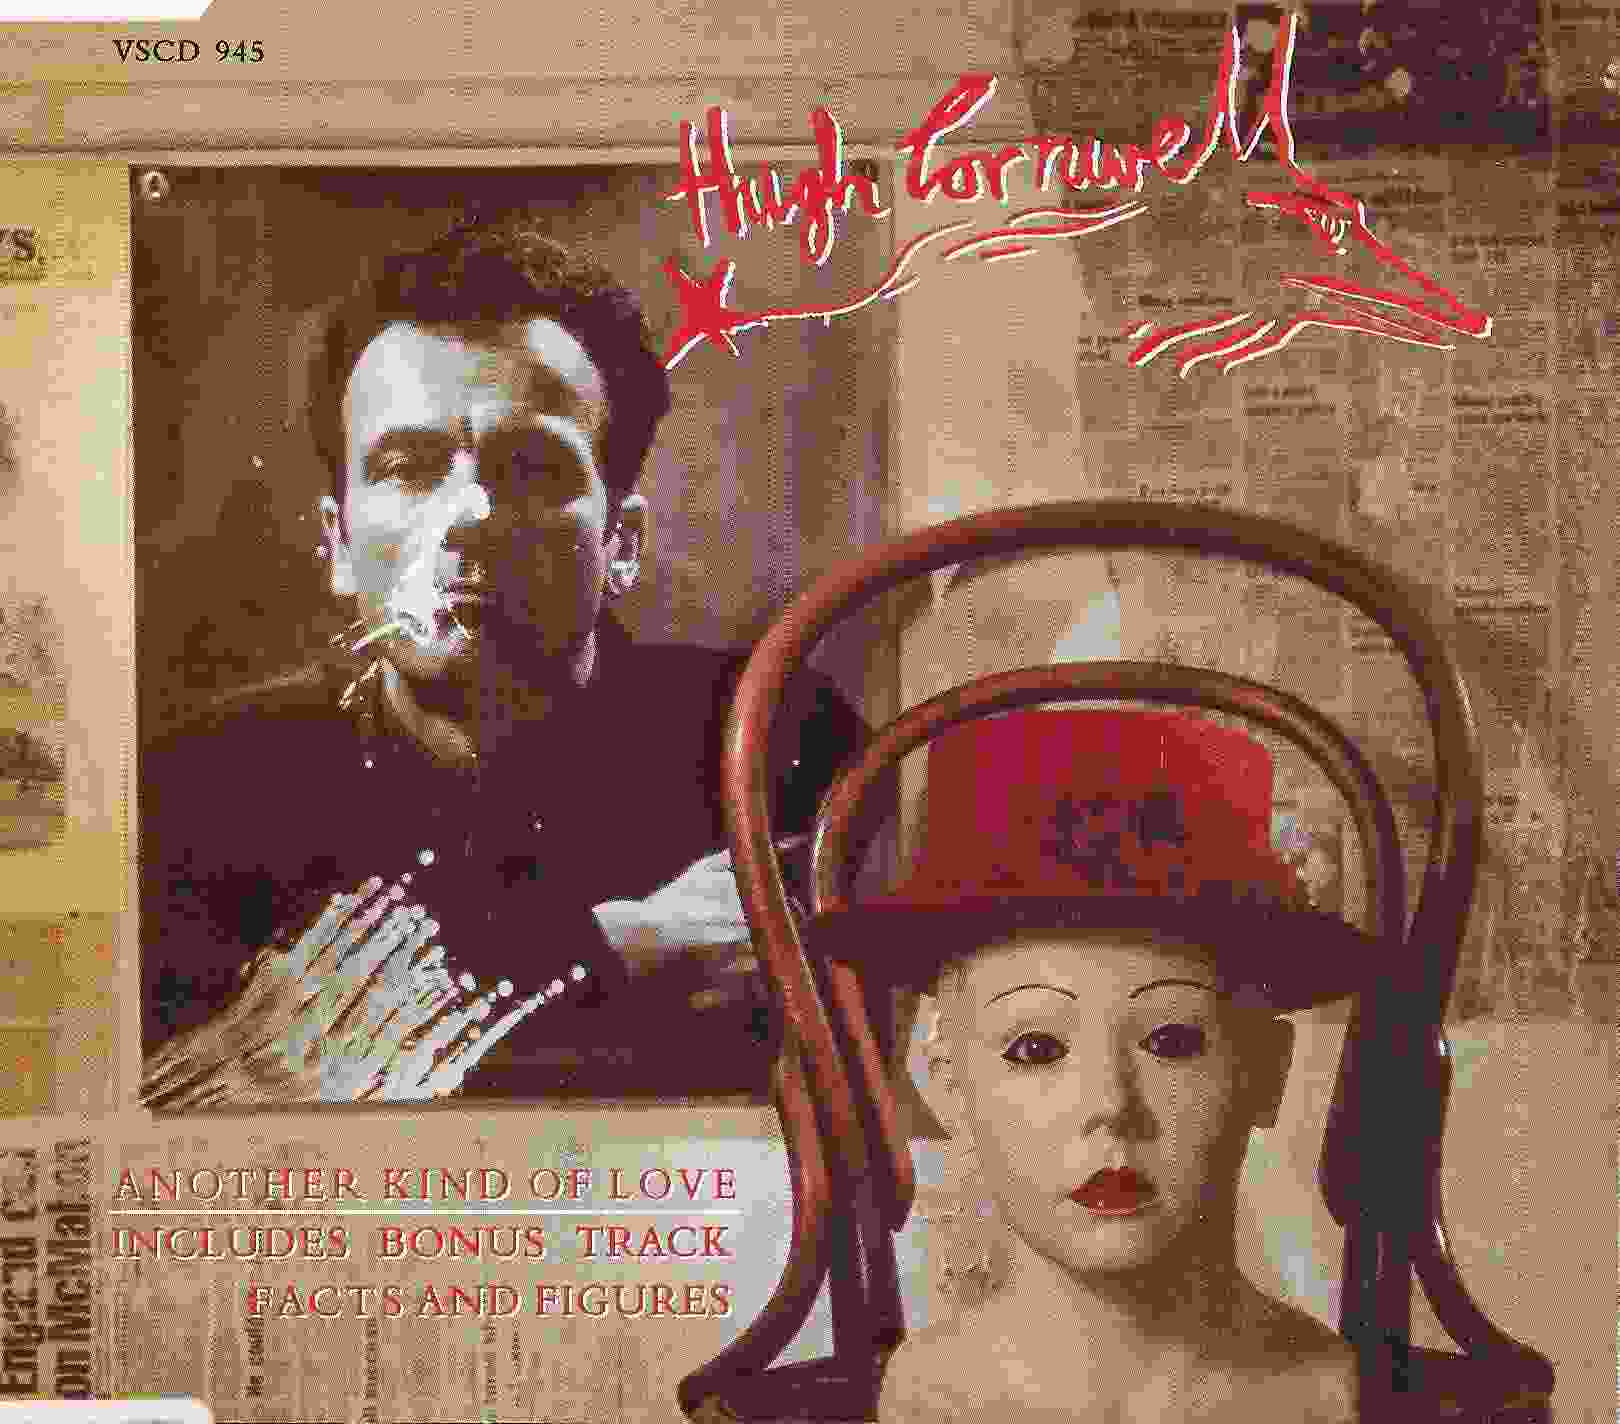 Picture of VSCD 945 Another kind of love by artist Hugh Cornwell from The Stranglers cdsingles